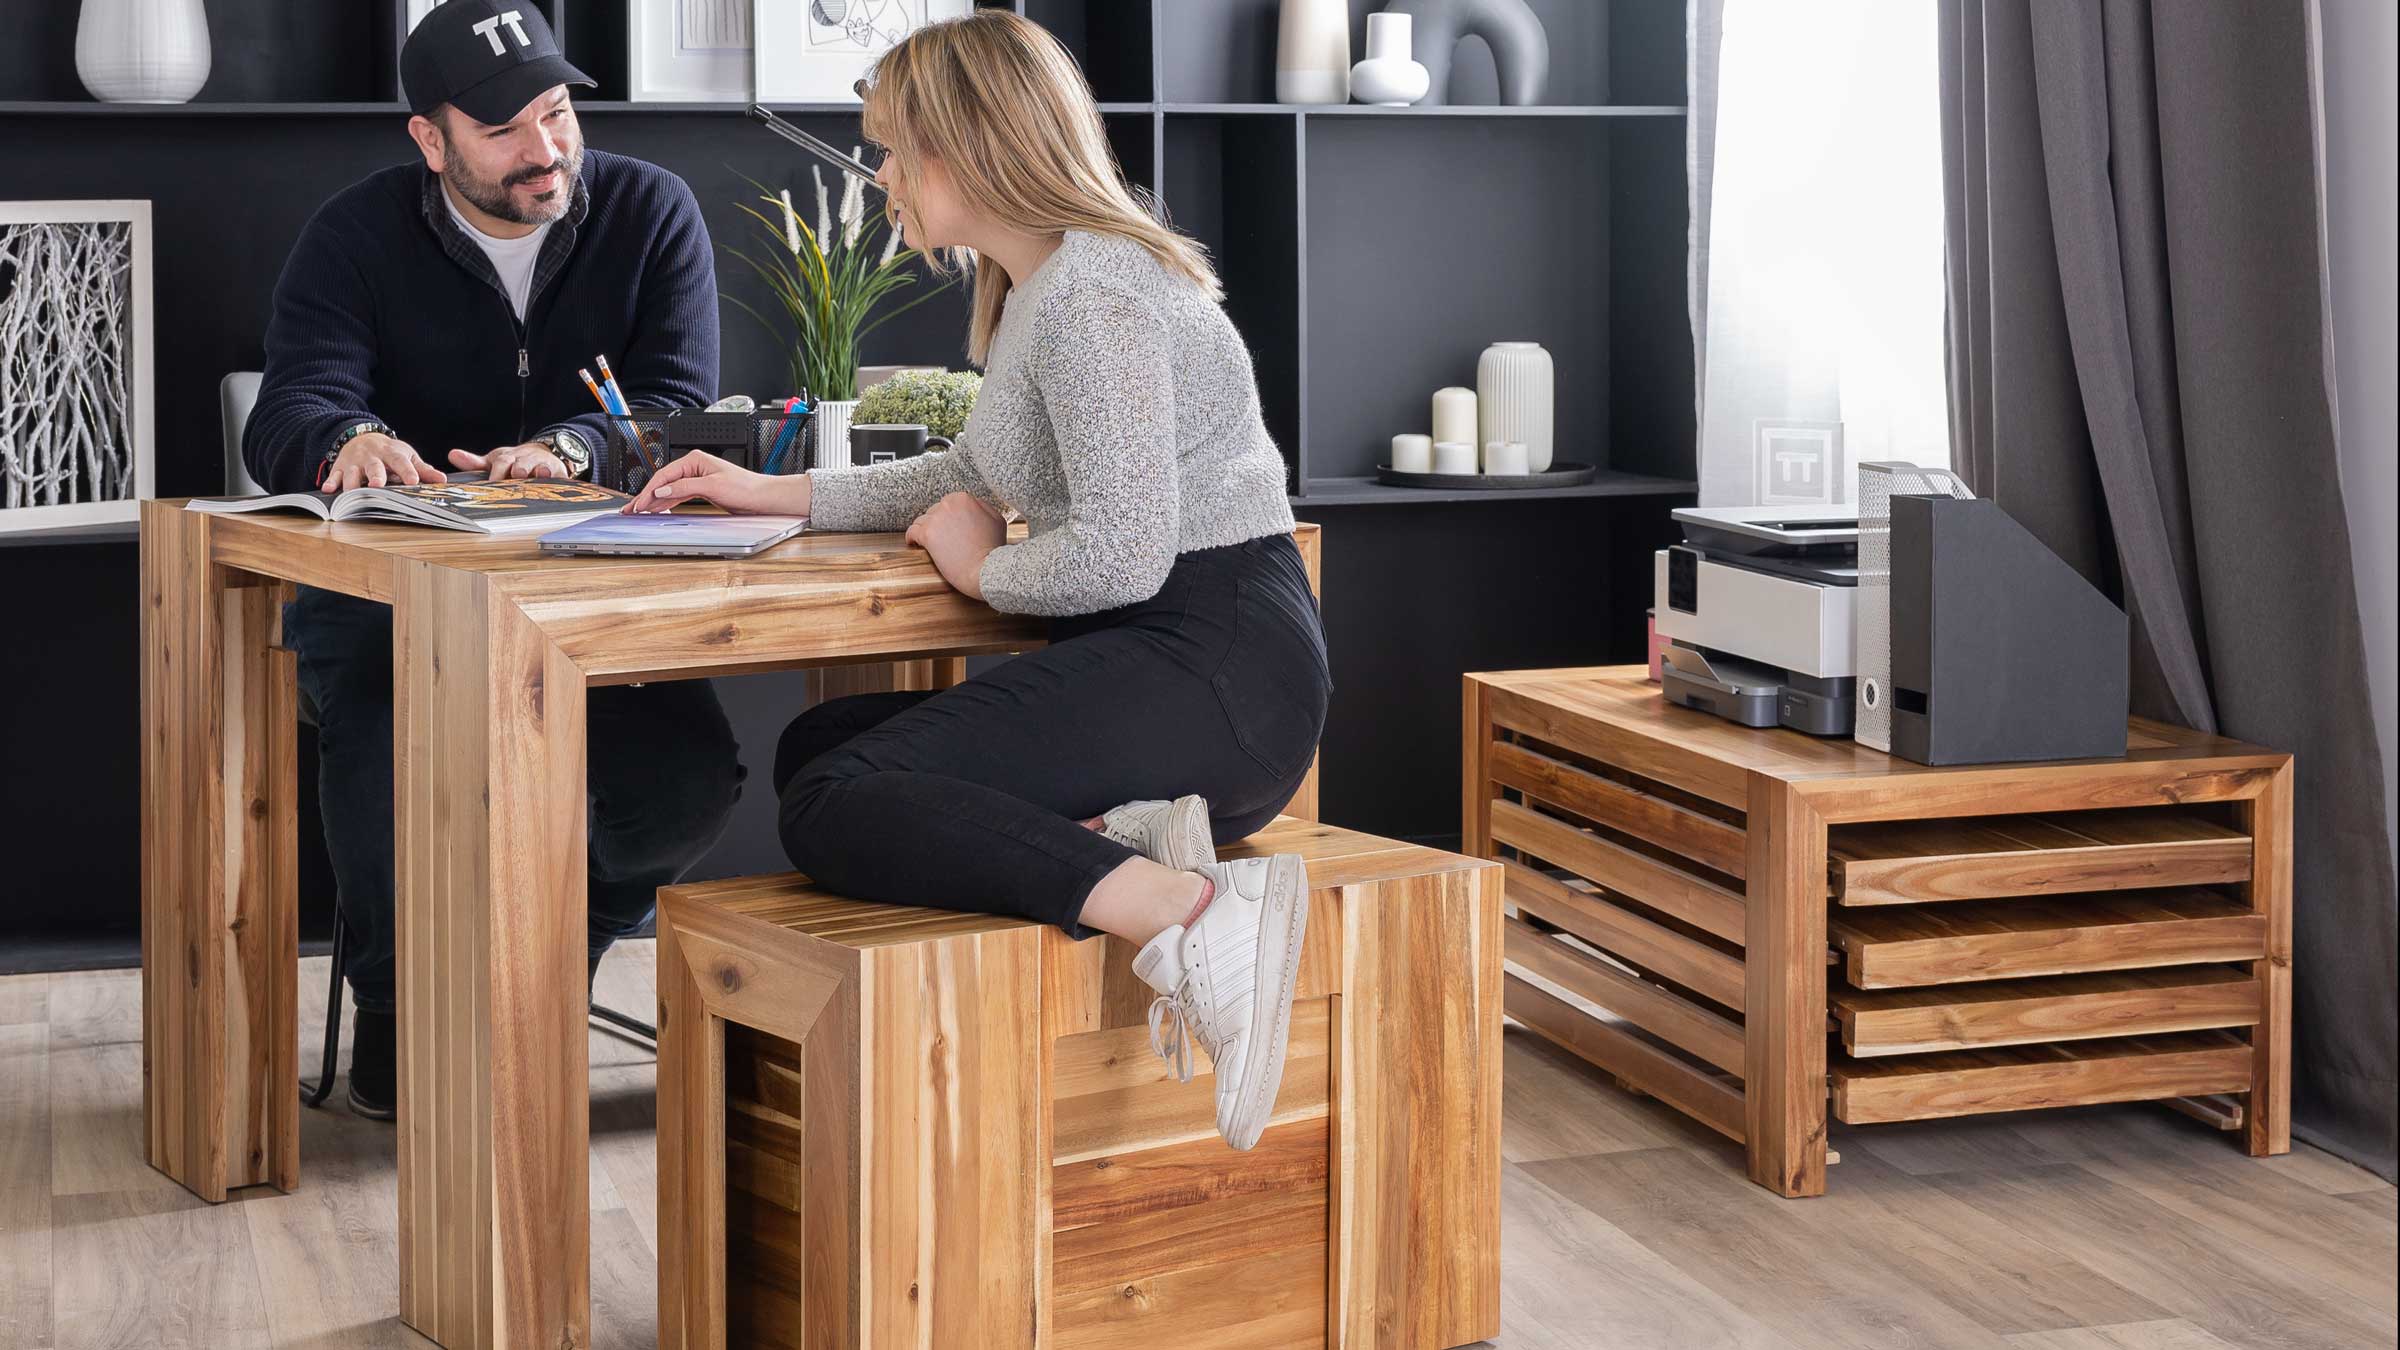 Creative office-seating options that boost productivity